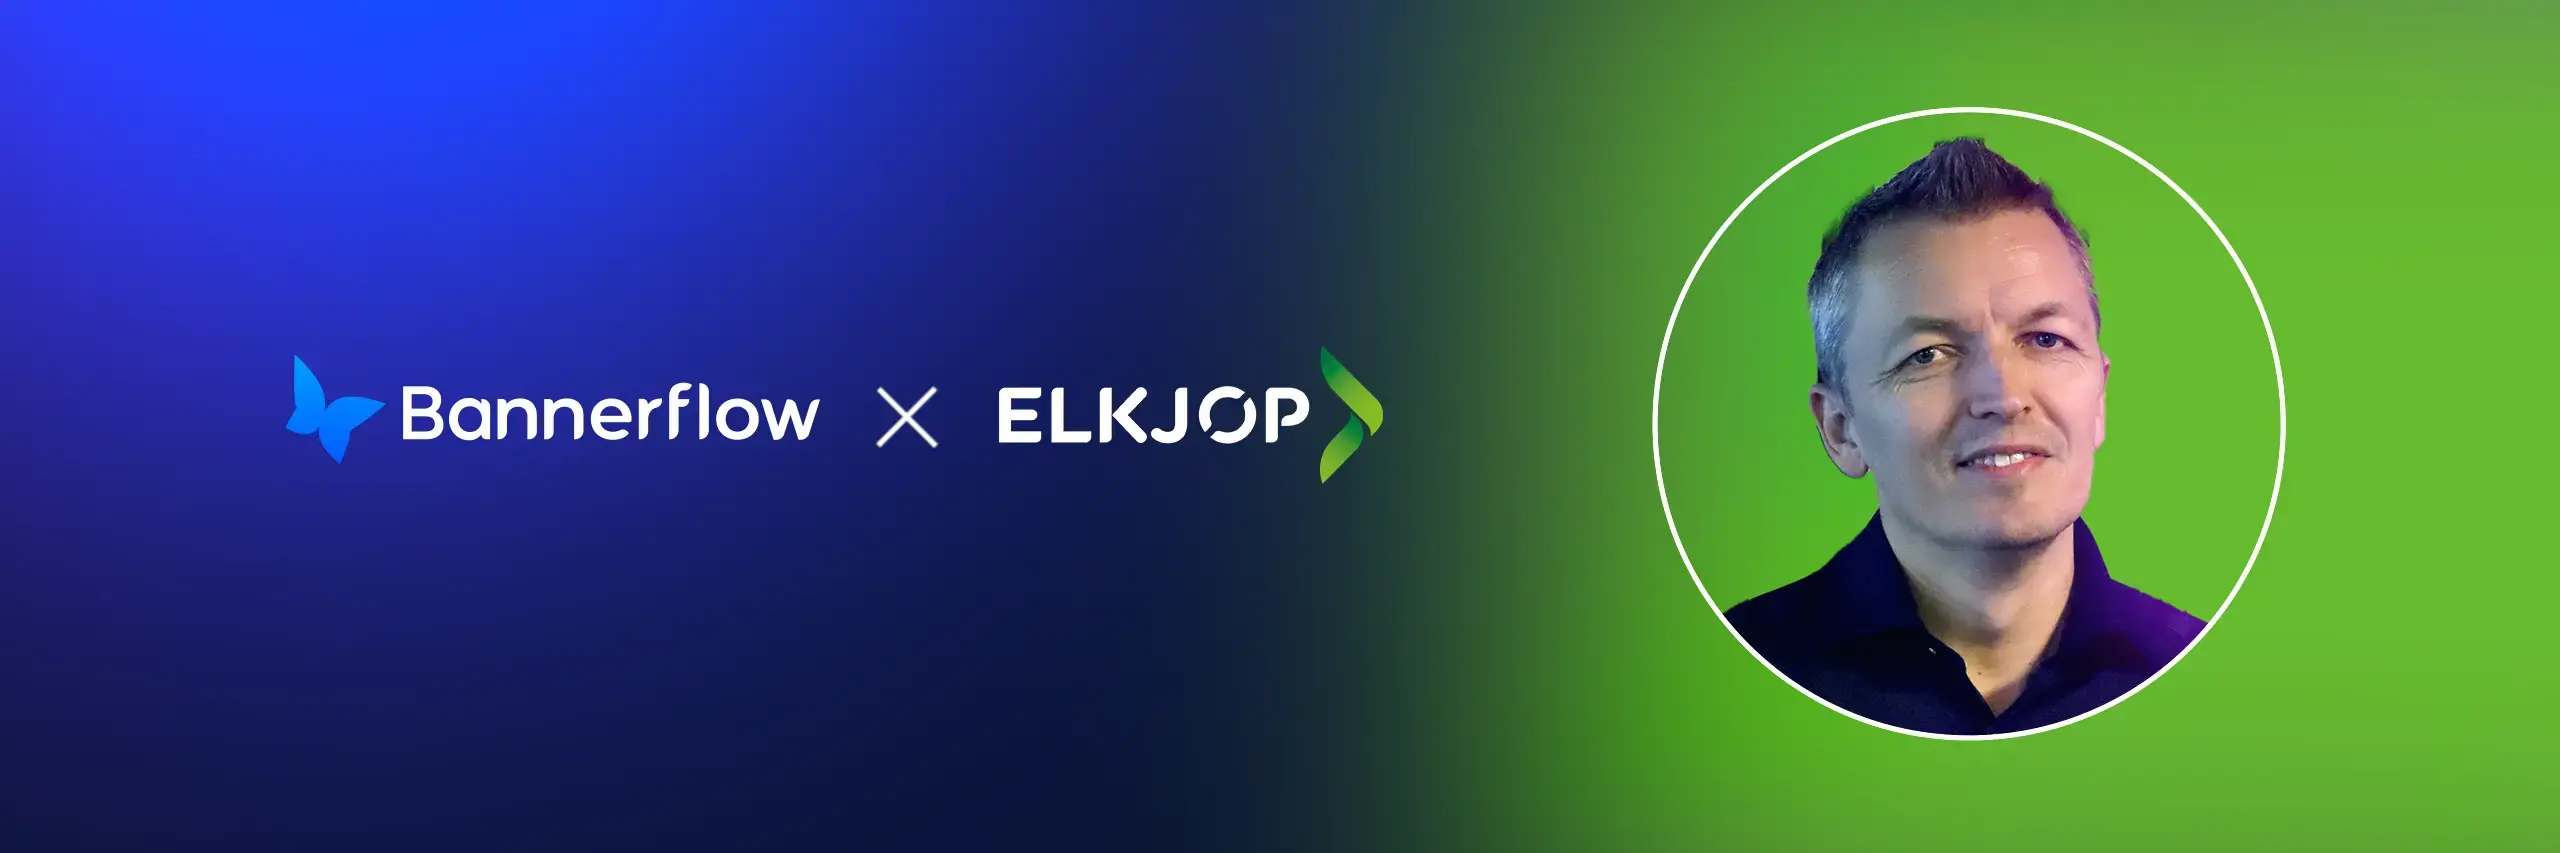 Interview: Mastering Digital Engagement with Bannerflow - Insights from Elkjöp